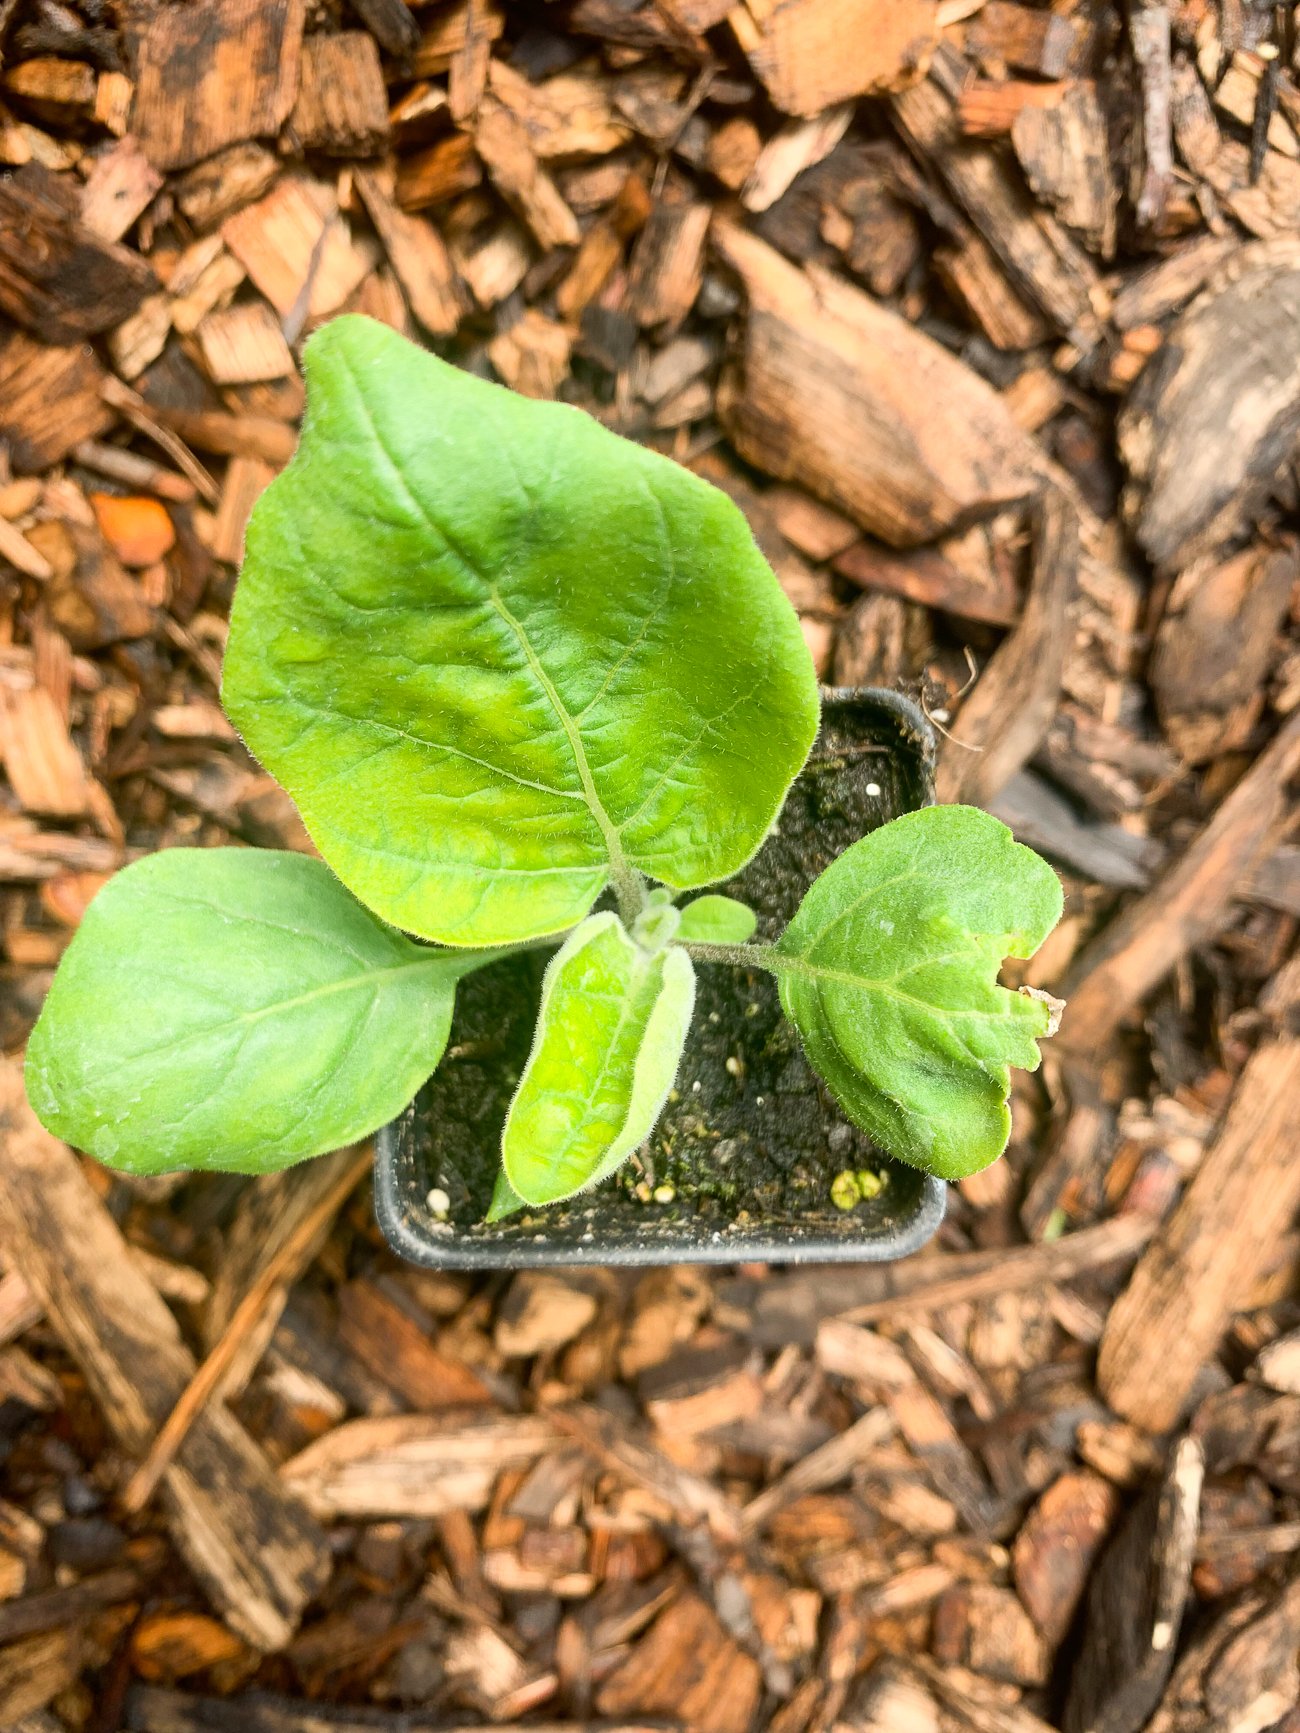 eggplant seedling in small pot